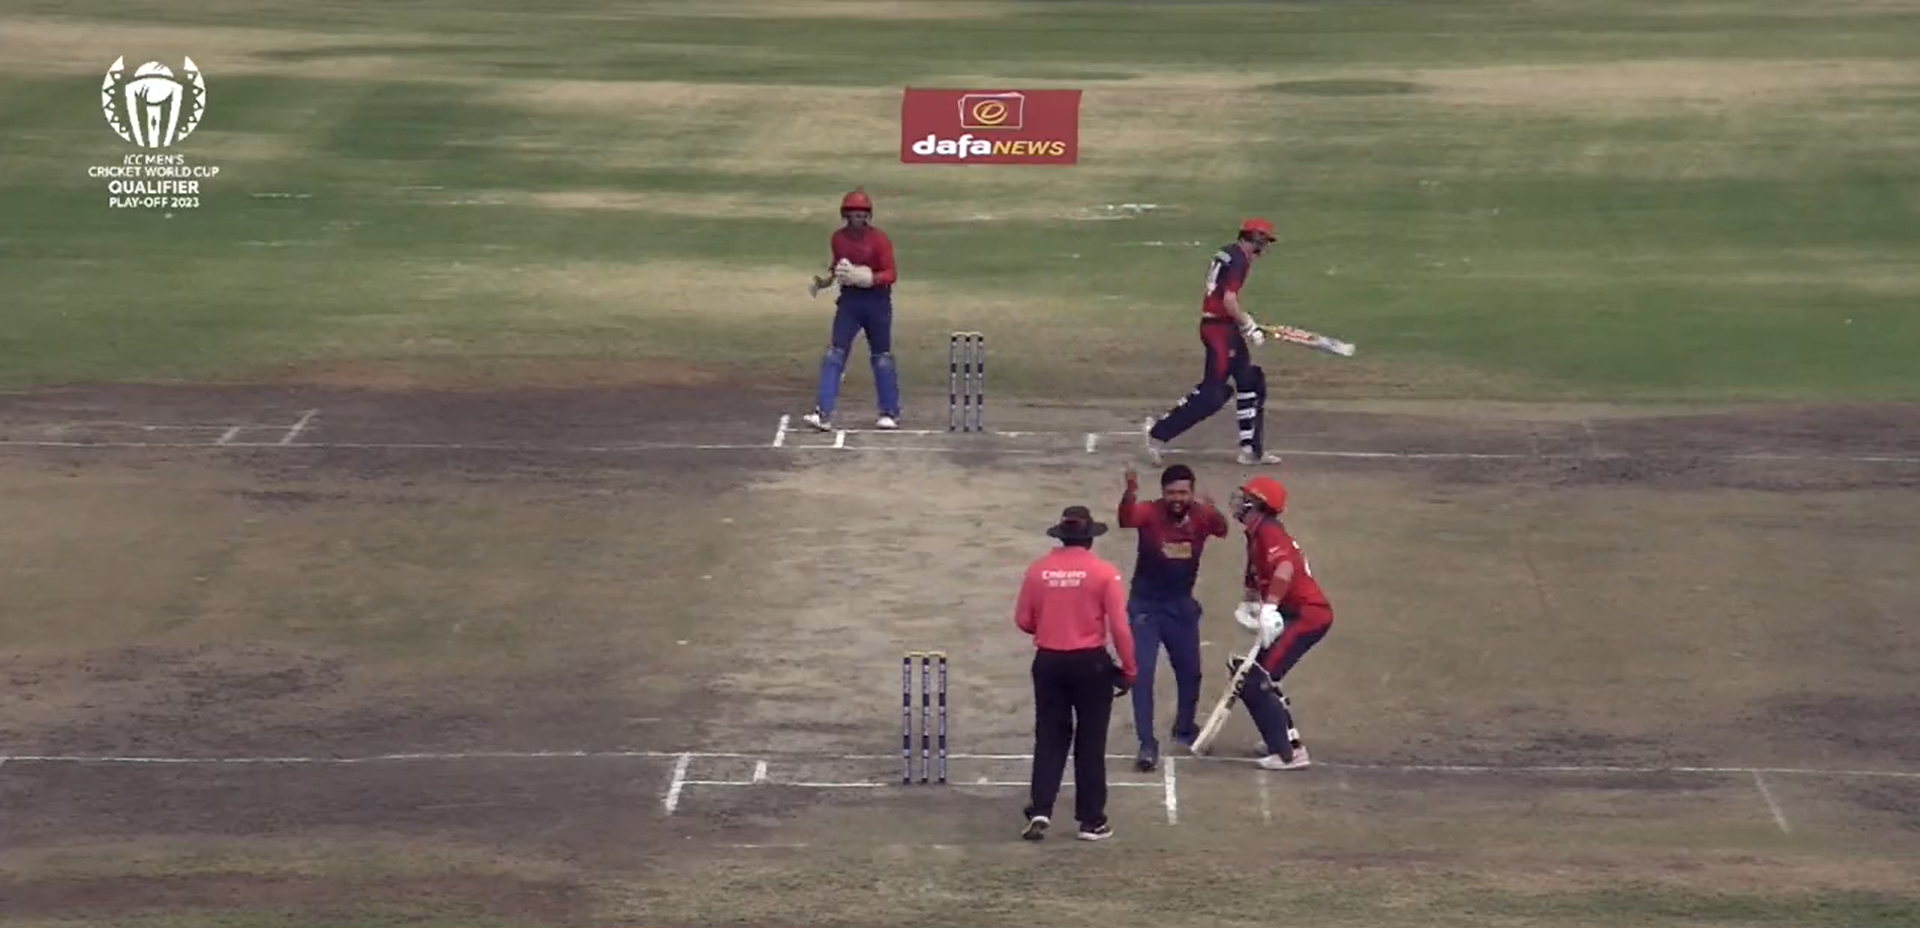 ICC CWC Qualifier Playoff | Twitter in disbelief over Rohan Mustafa celebrating scalp by adding third ball to non-striker's collection